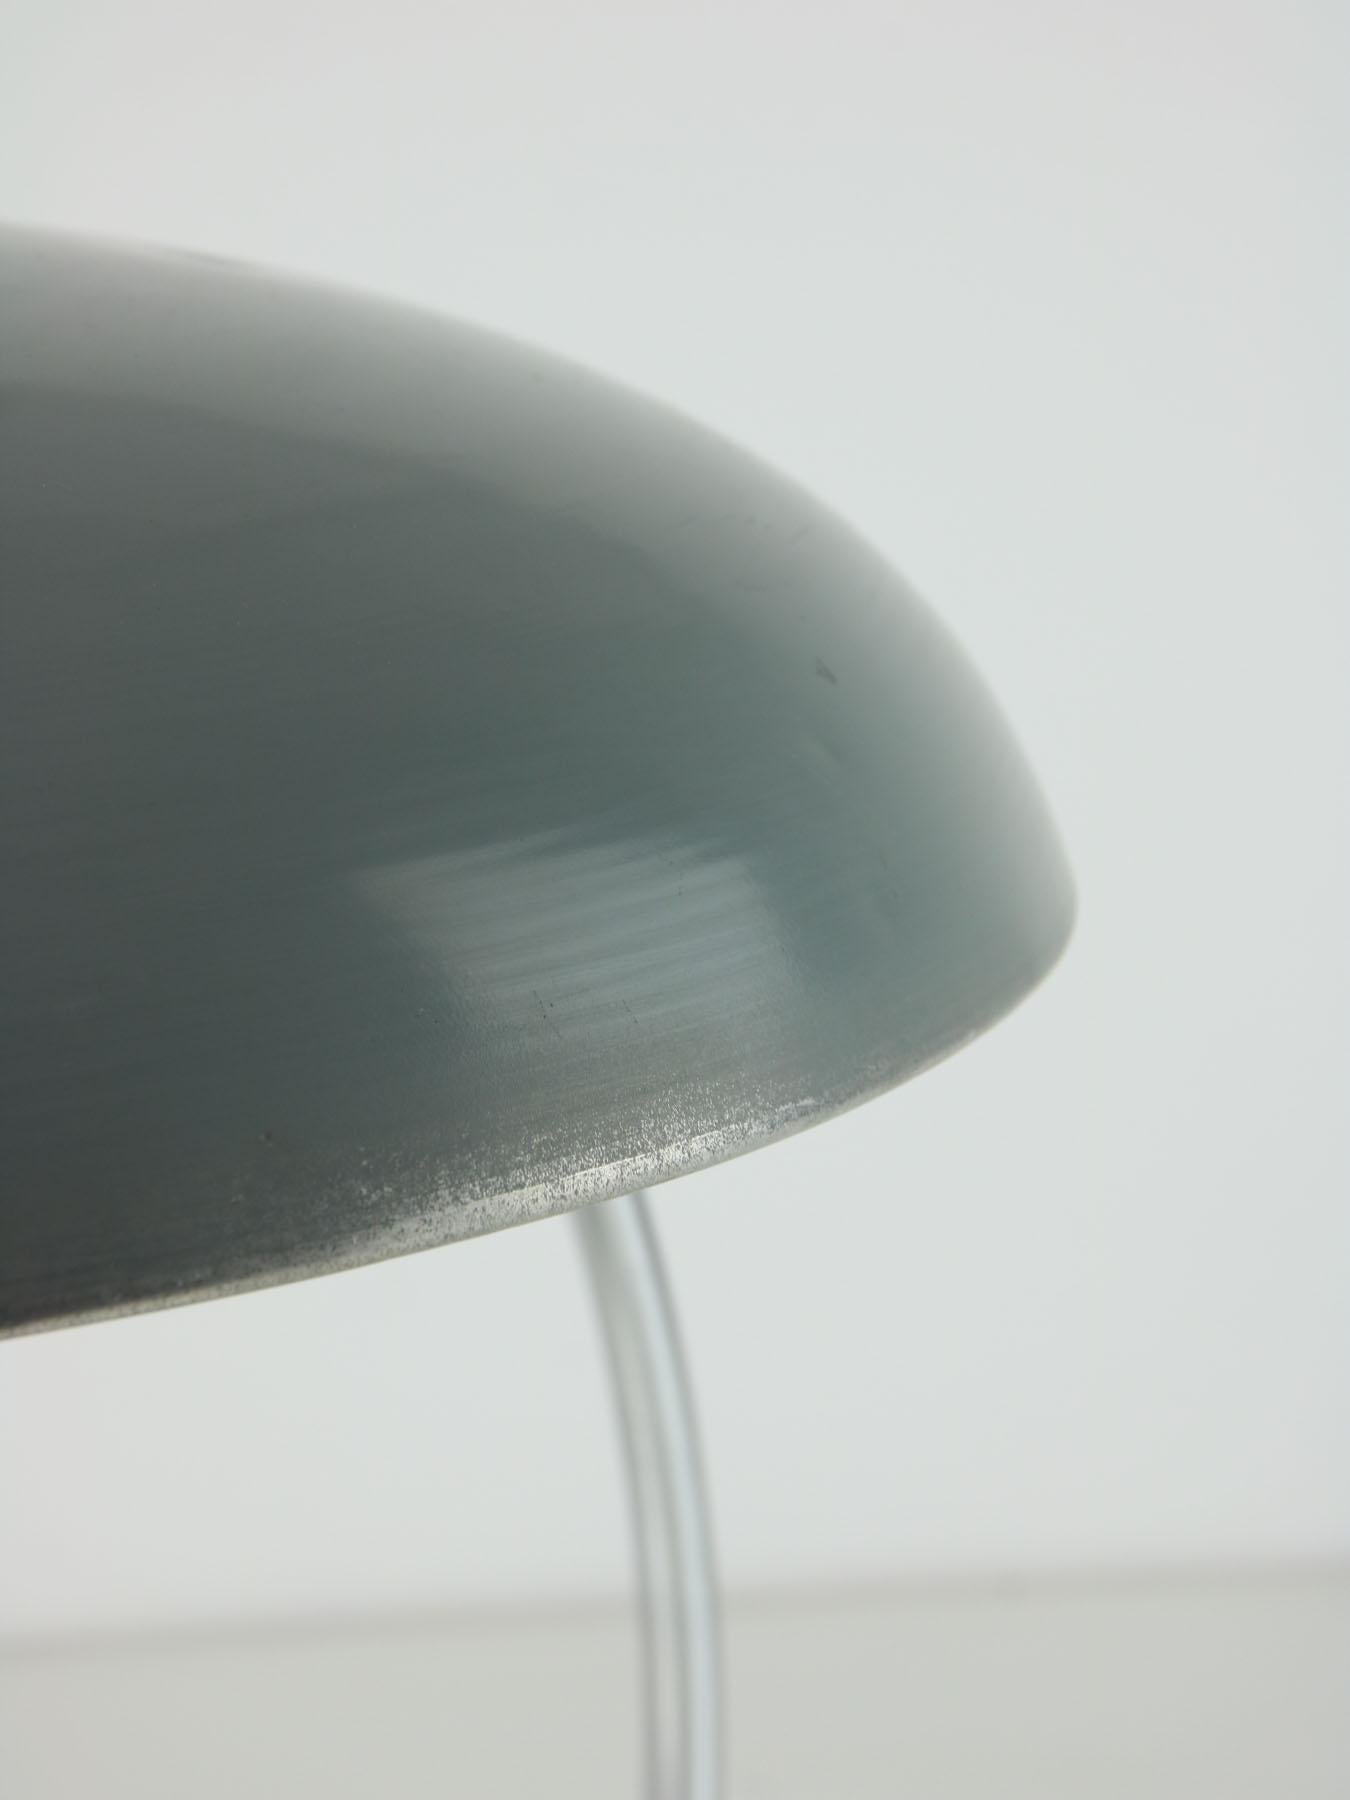 Bauhaus Saucer Table Lamp with Big Button For Sale 8